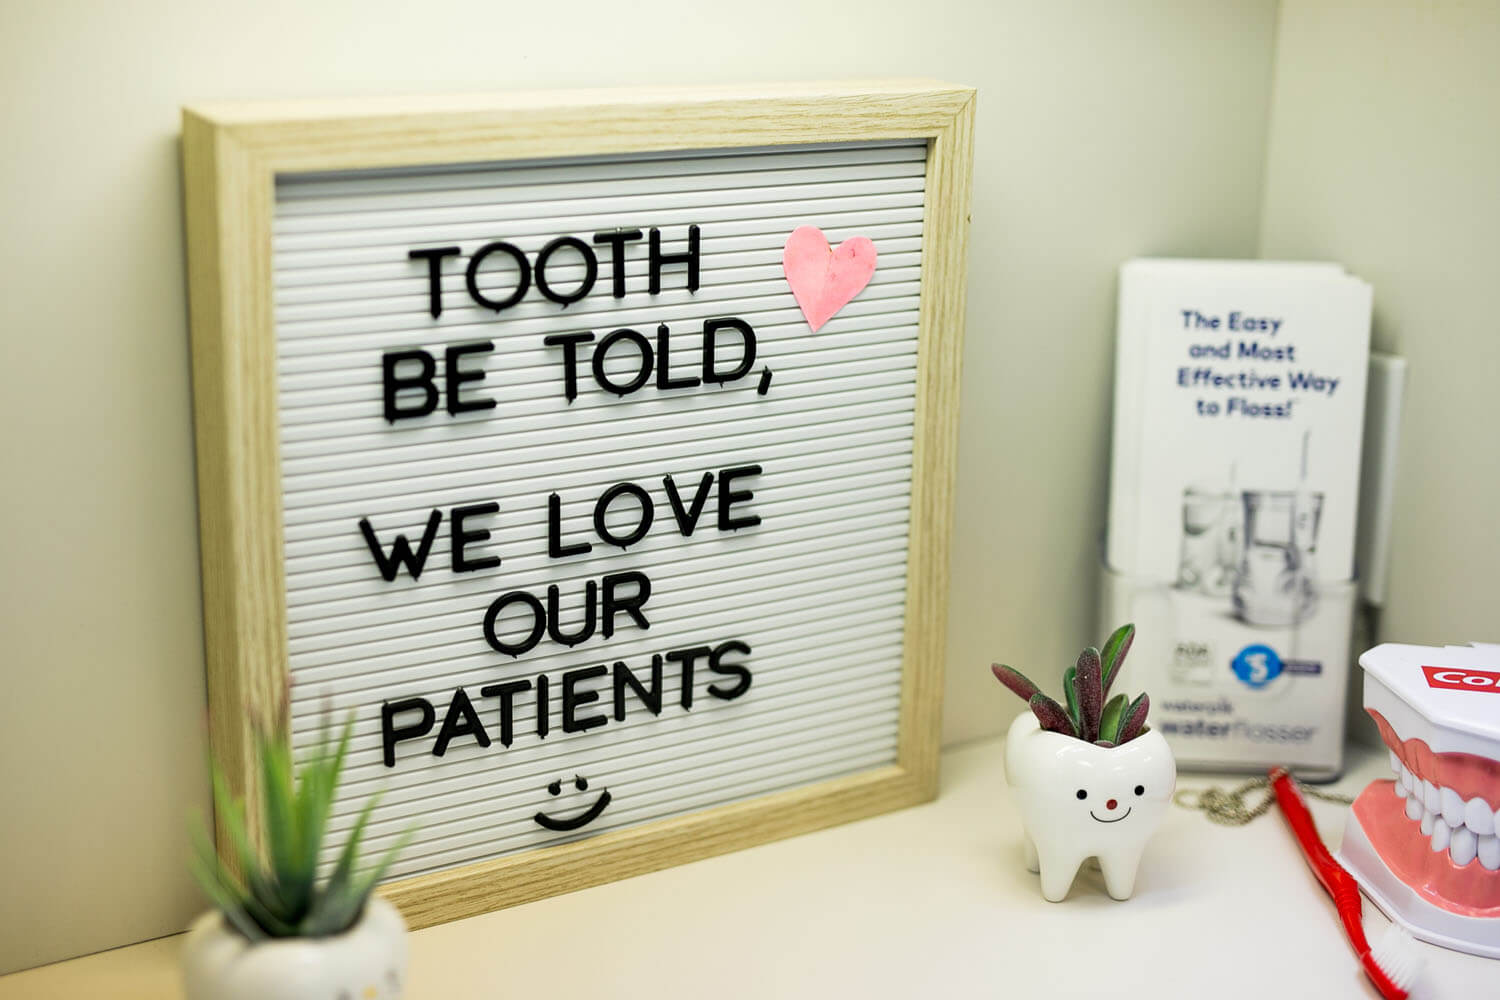 Small succulents in pots shaped like teeth with smiley faces painted on them sit on a shelf alongside other dental-themed decor. A sign reads, "Tooth be told, we love our patients" with a paper heart attached.